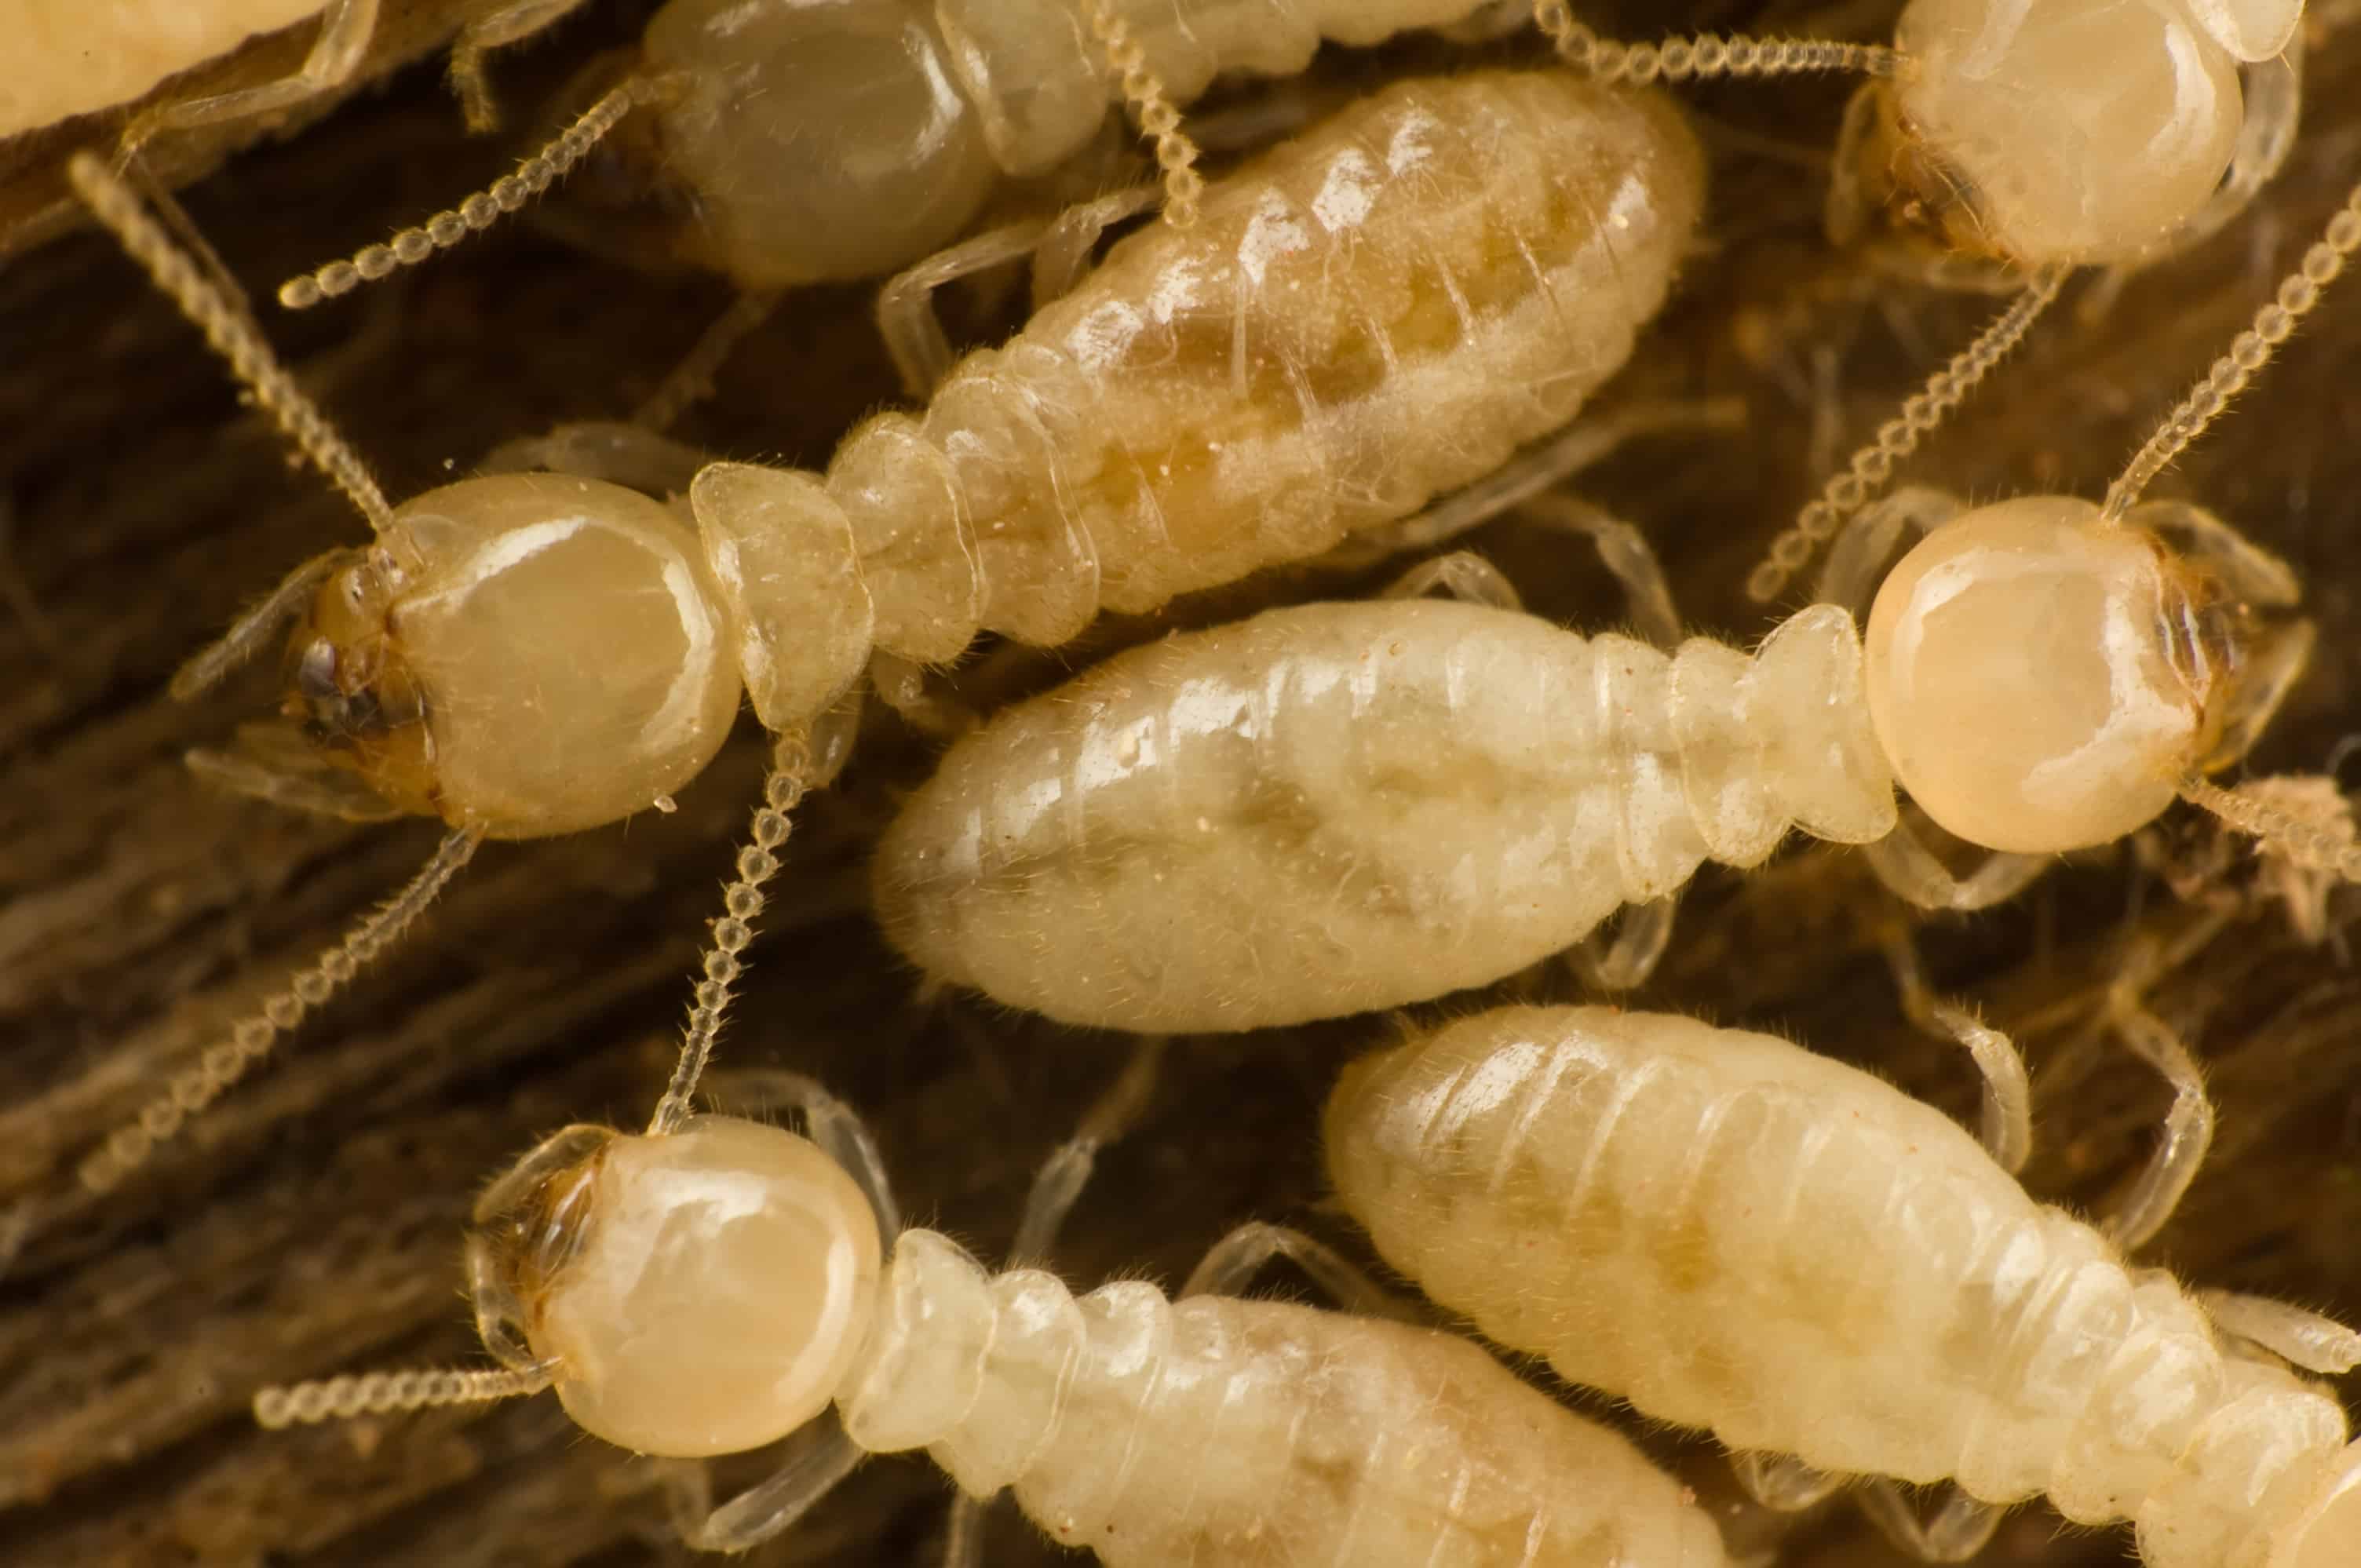 Close-up of a subterranean termite workers.